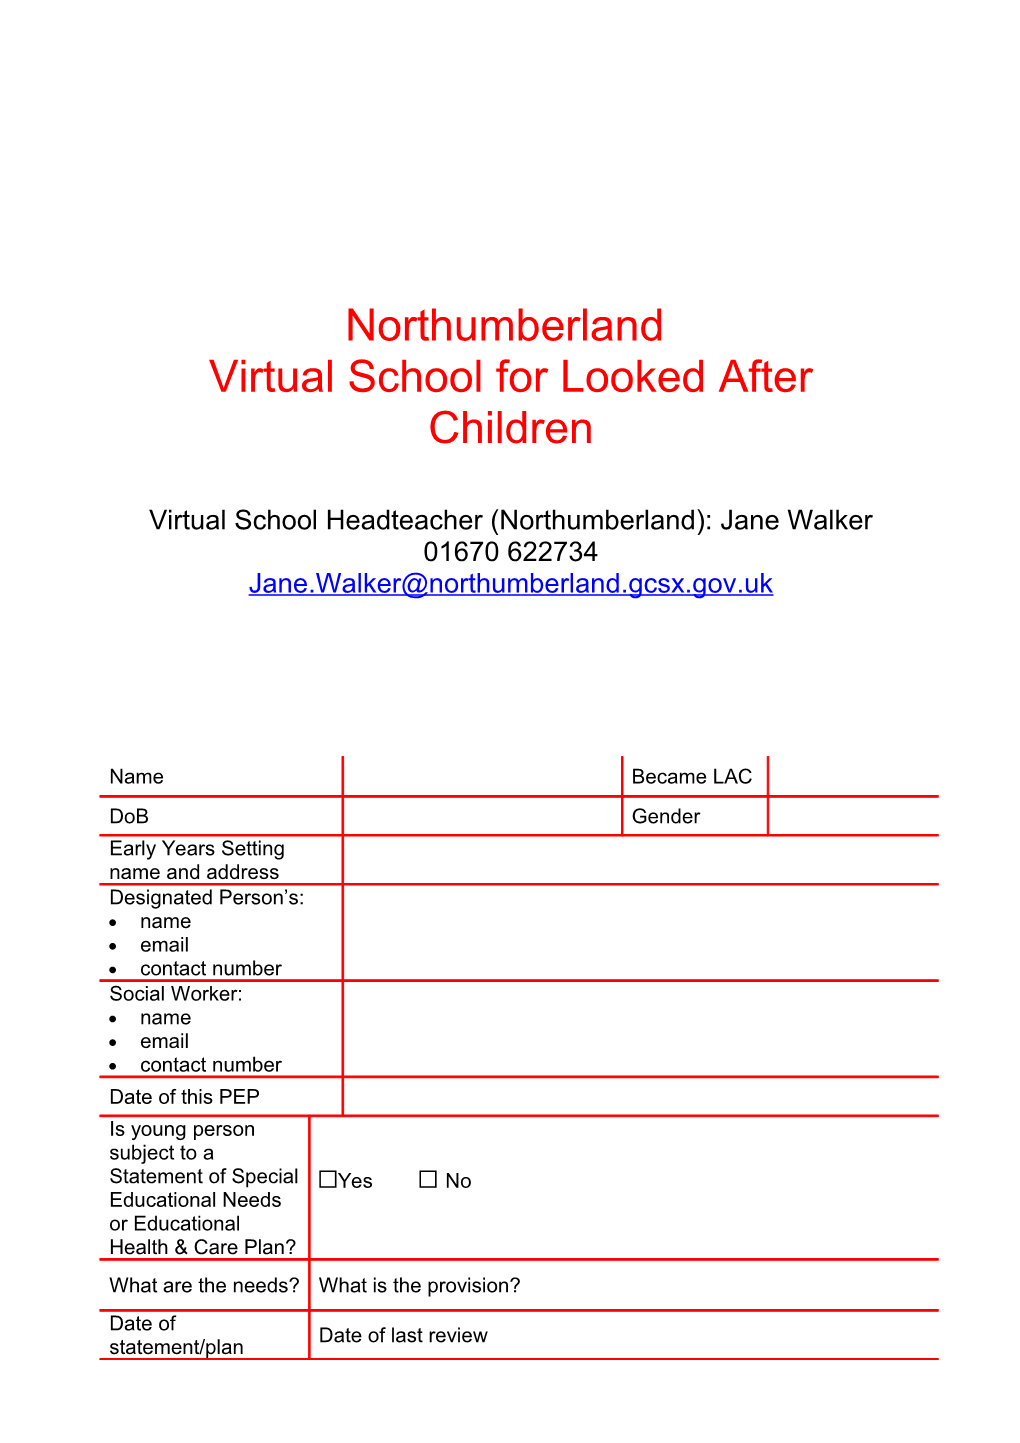 Virtual School for Looked After Children